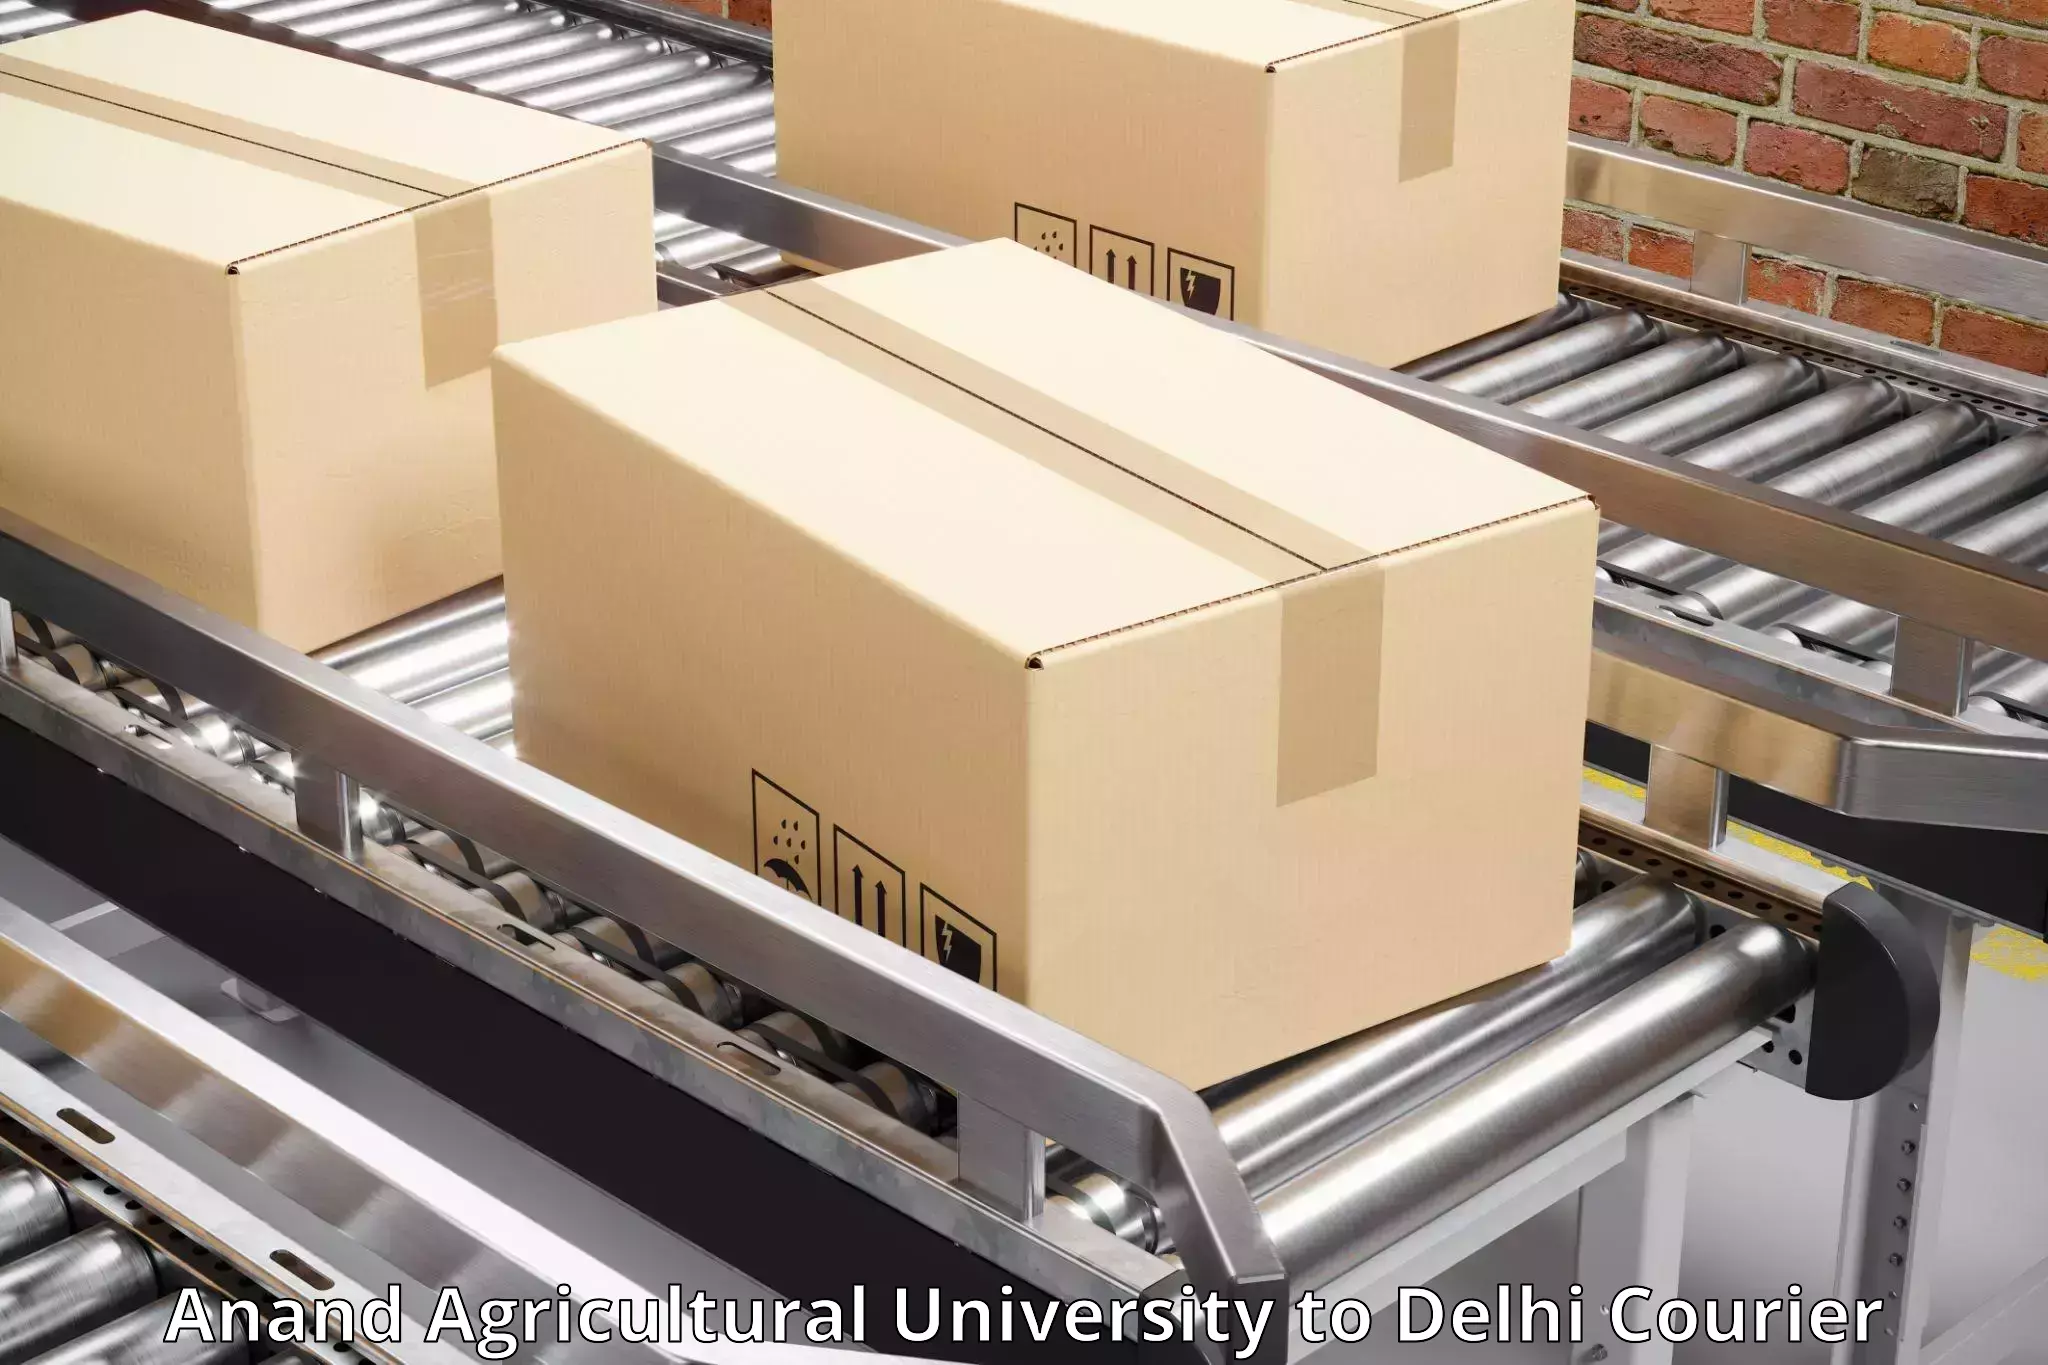 Express package handling in Anand Agricultural University to Guru Gobind Singh Indraprastha University New Delhi